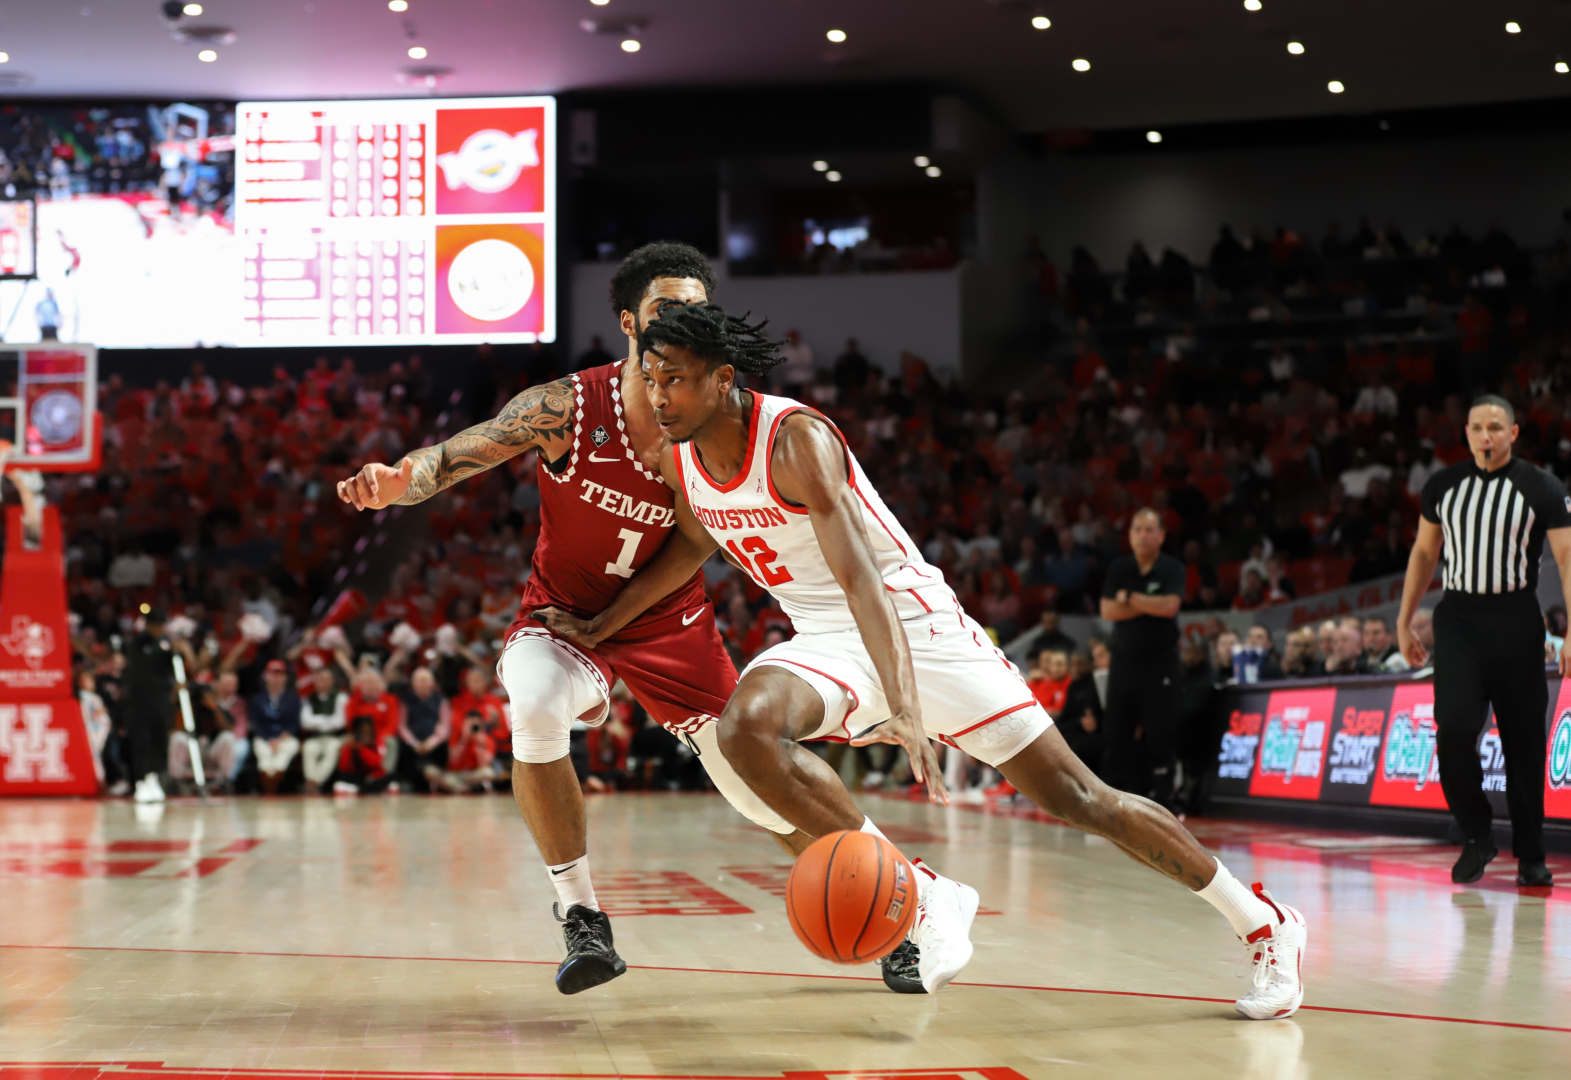 UH basketball dropped its second game of the year on Sunday, falling to AAC foe Temple 56-55 at Fertitta Center. | Anh Le/The Cougar